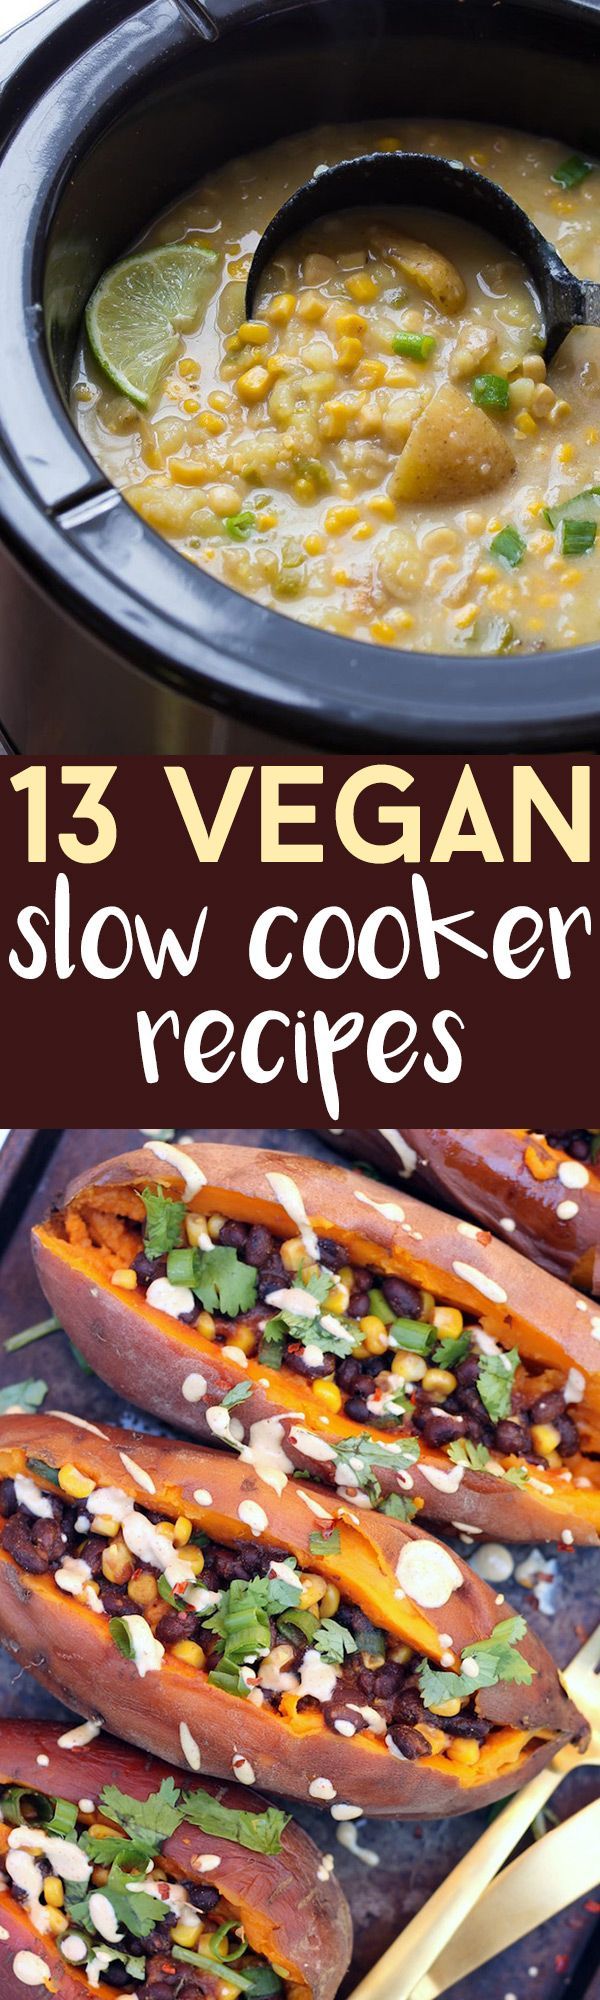 Get cozy this winter and bust out your Crockpot for these Vegan Slow Cooker recipes! Lots of hearty chills, soups & even oatmeal.